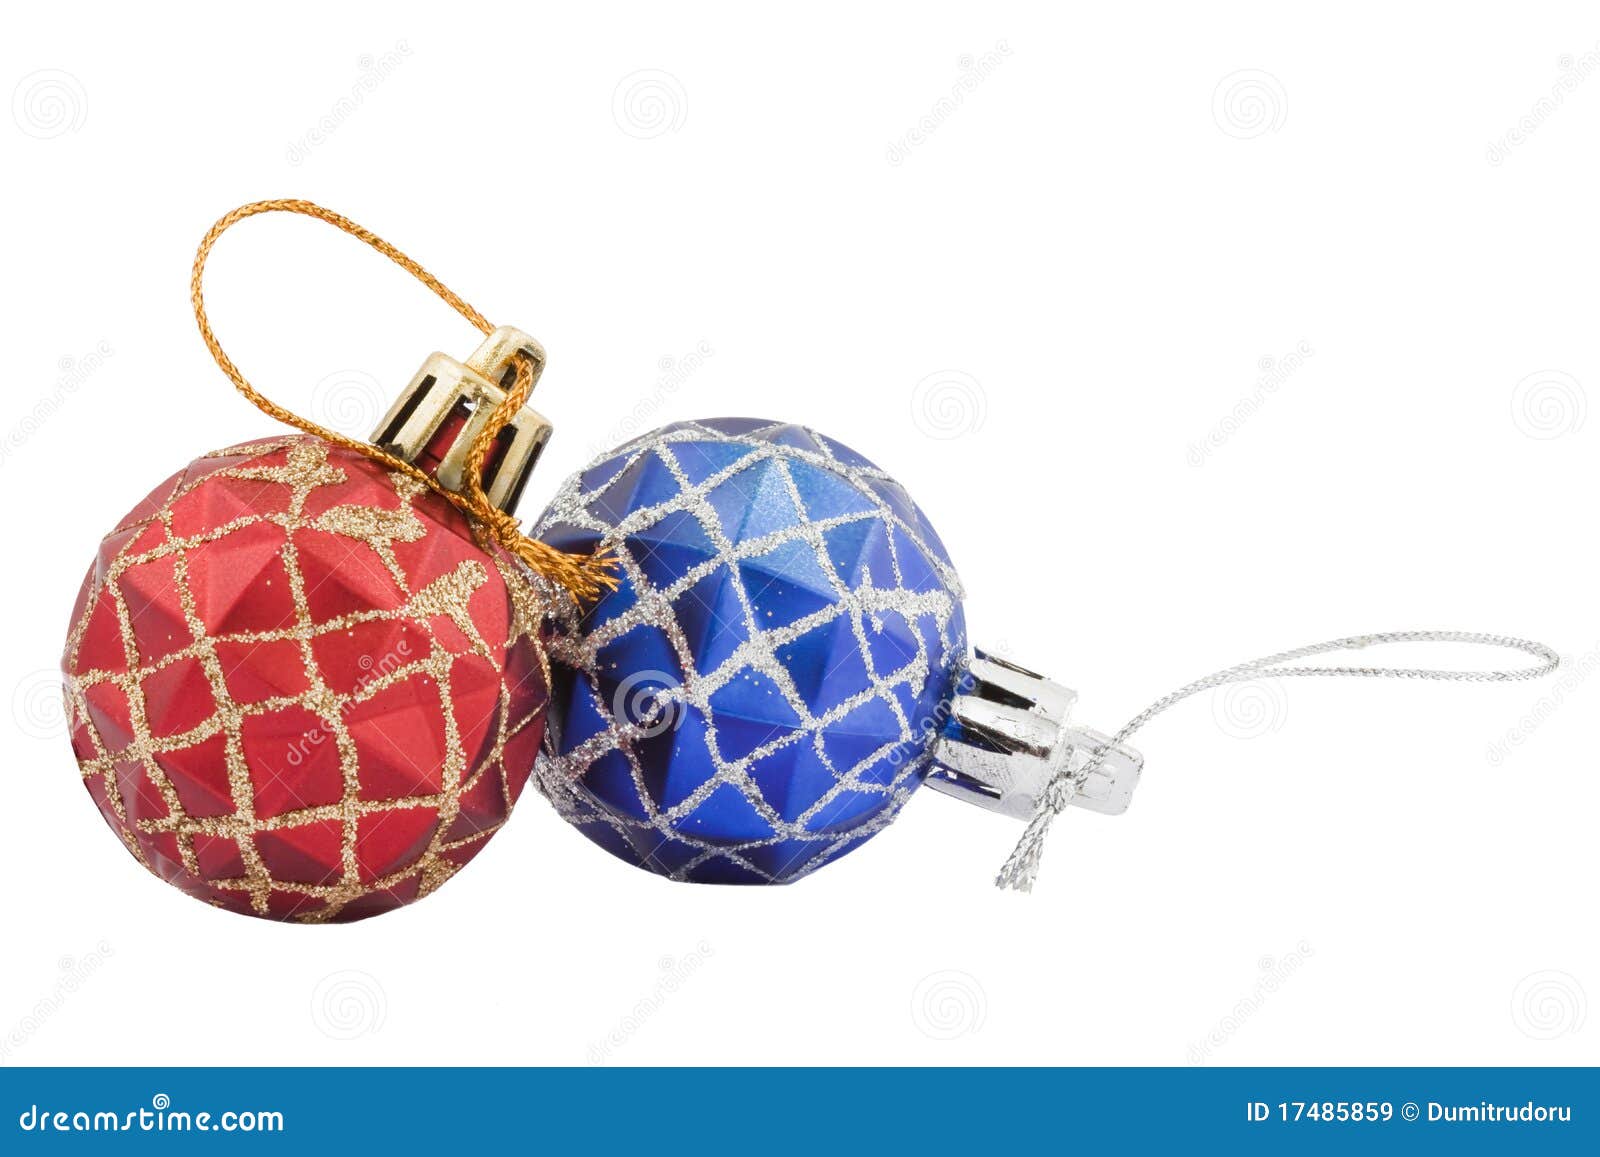 Red and Blue Christmas Toys Stock Image - Image of silver, isolated ...